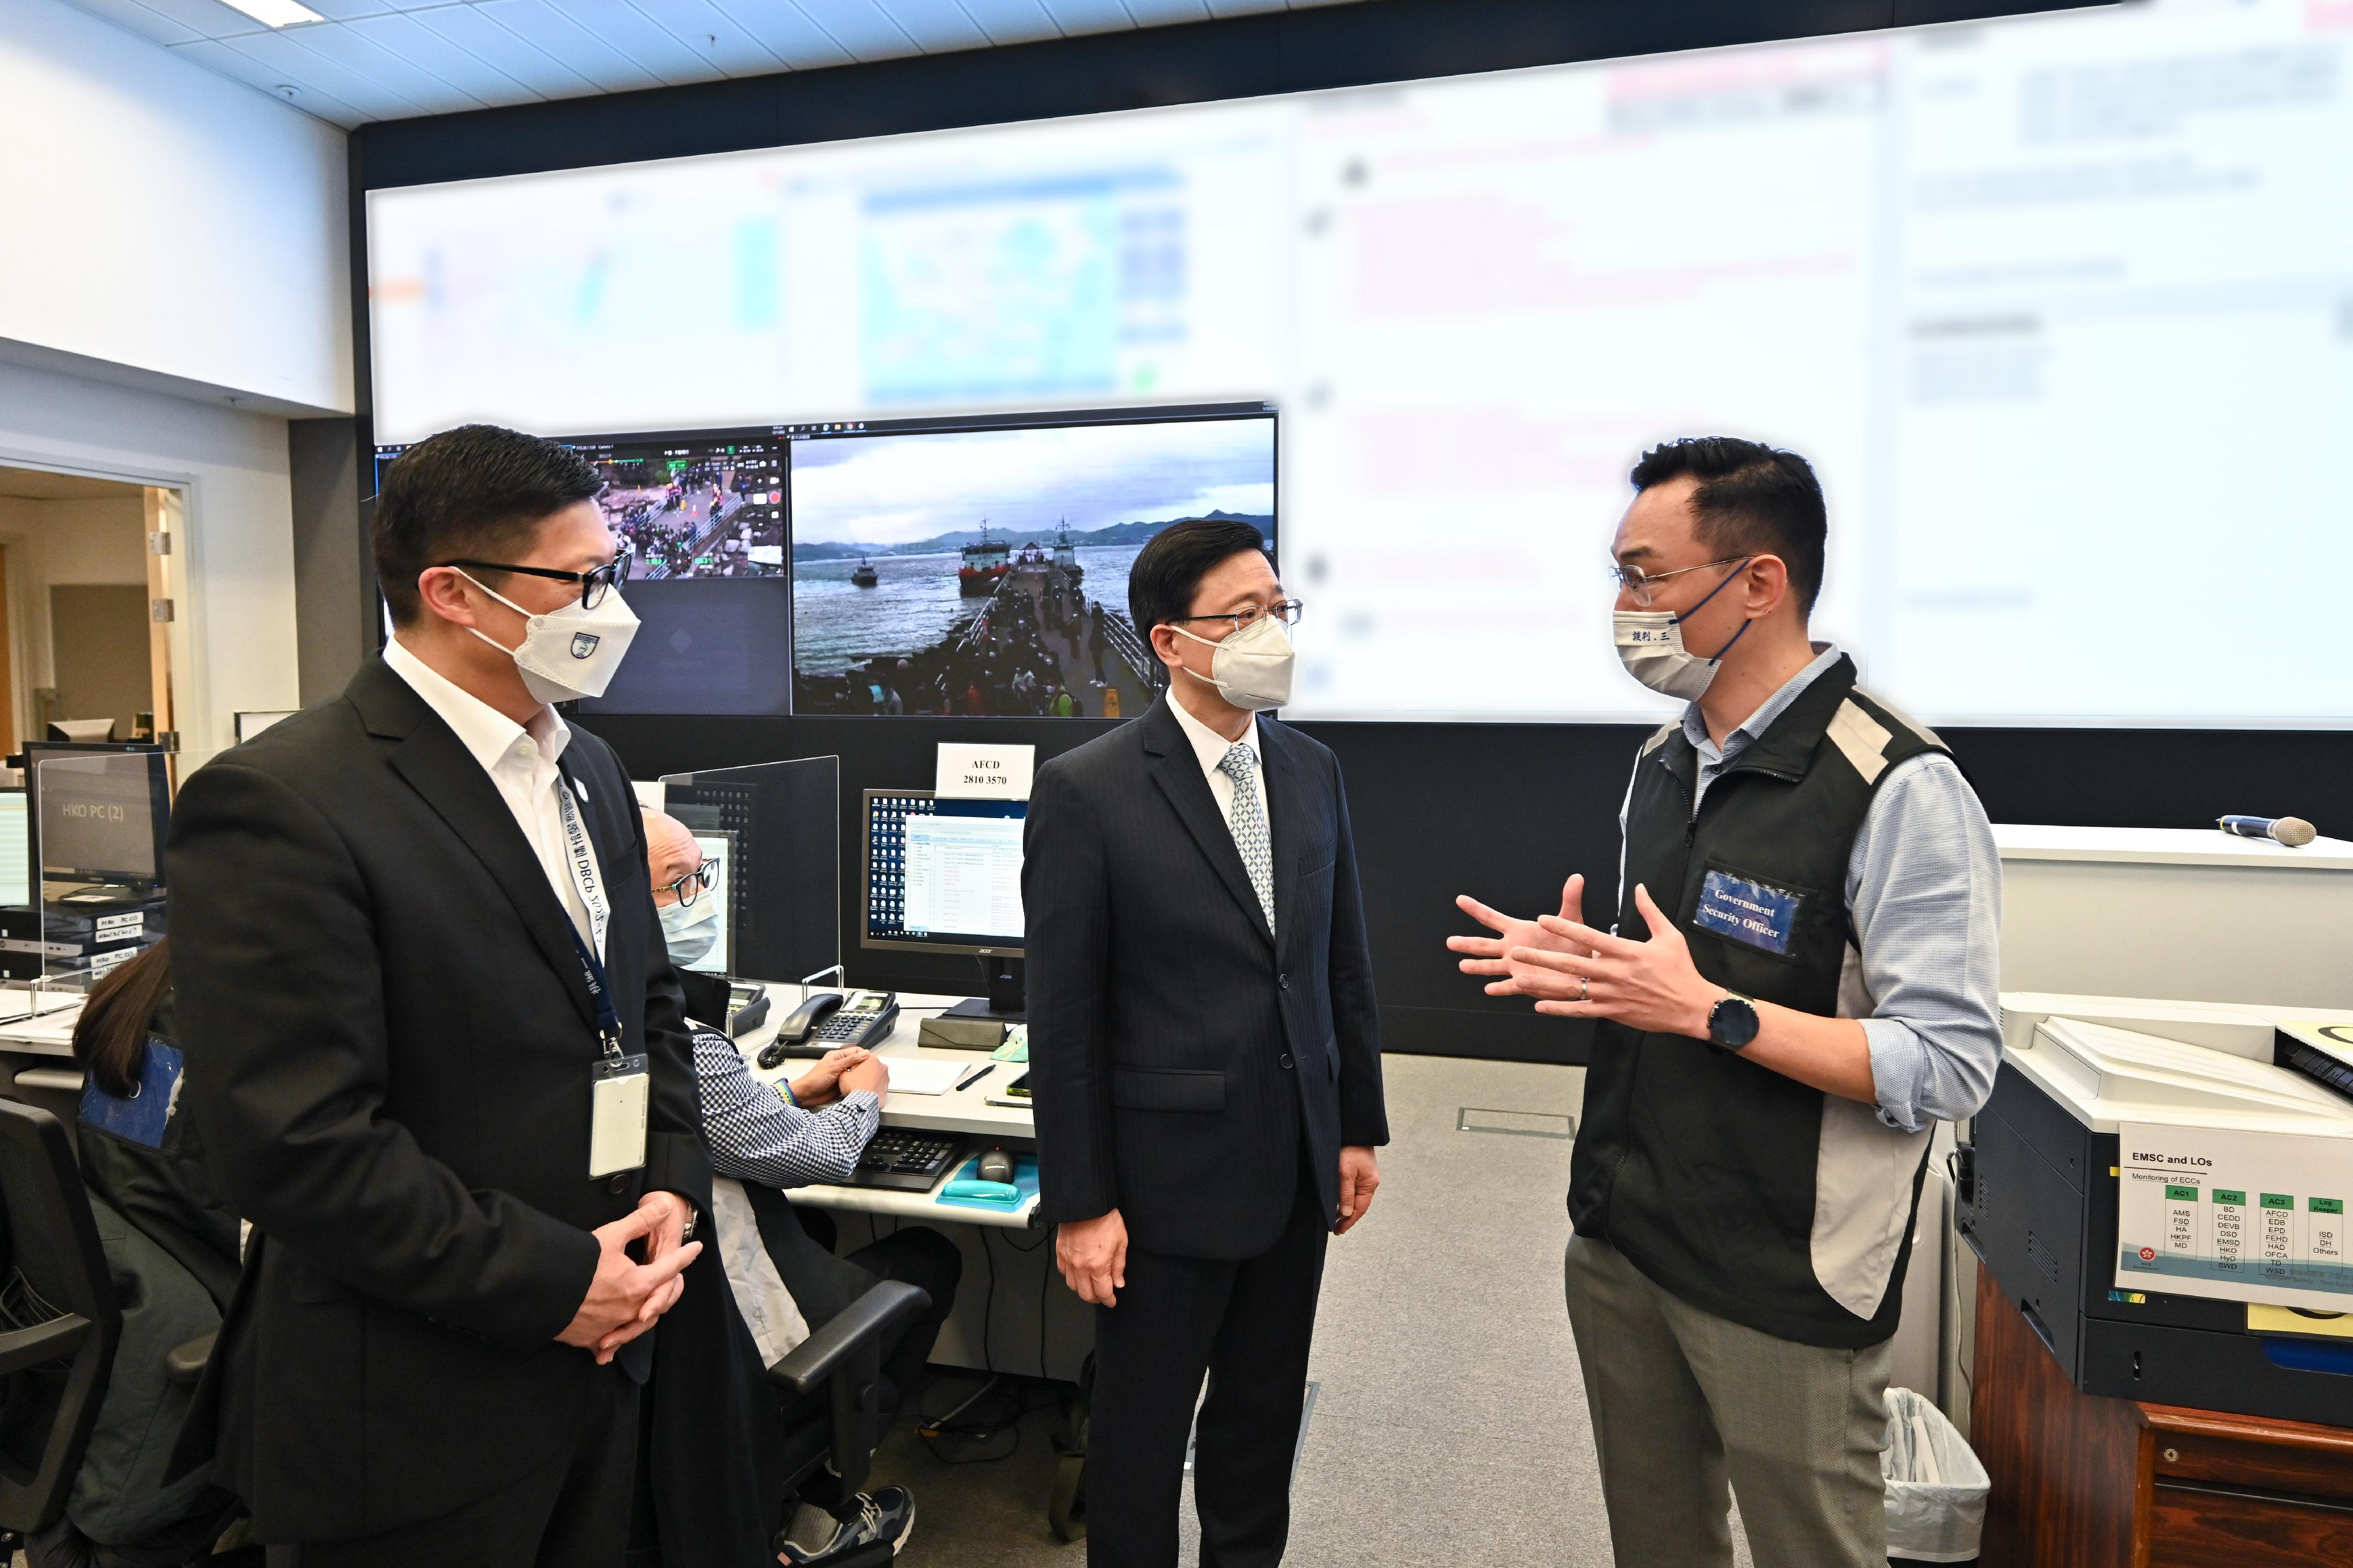 The Government conducted an inter-departmental exercise, "Checkerboard III", today (January 12). Photo shows the Chief Executive, Mr John Lee (centre), accompanied by the Secretary for Security, Mr Tang Ping-keung (left), inspecting the operation of the Emergency Monitoring and Support Centre during the exercise.